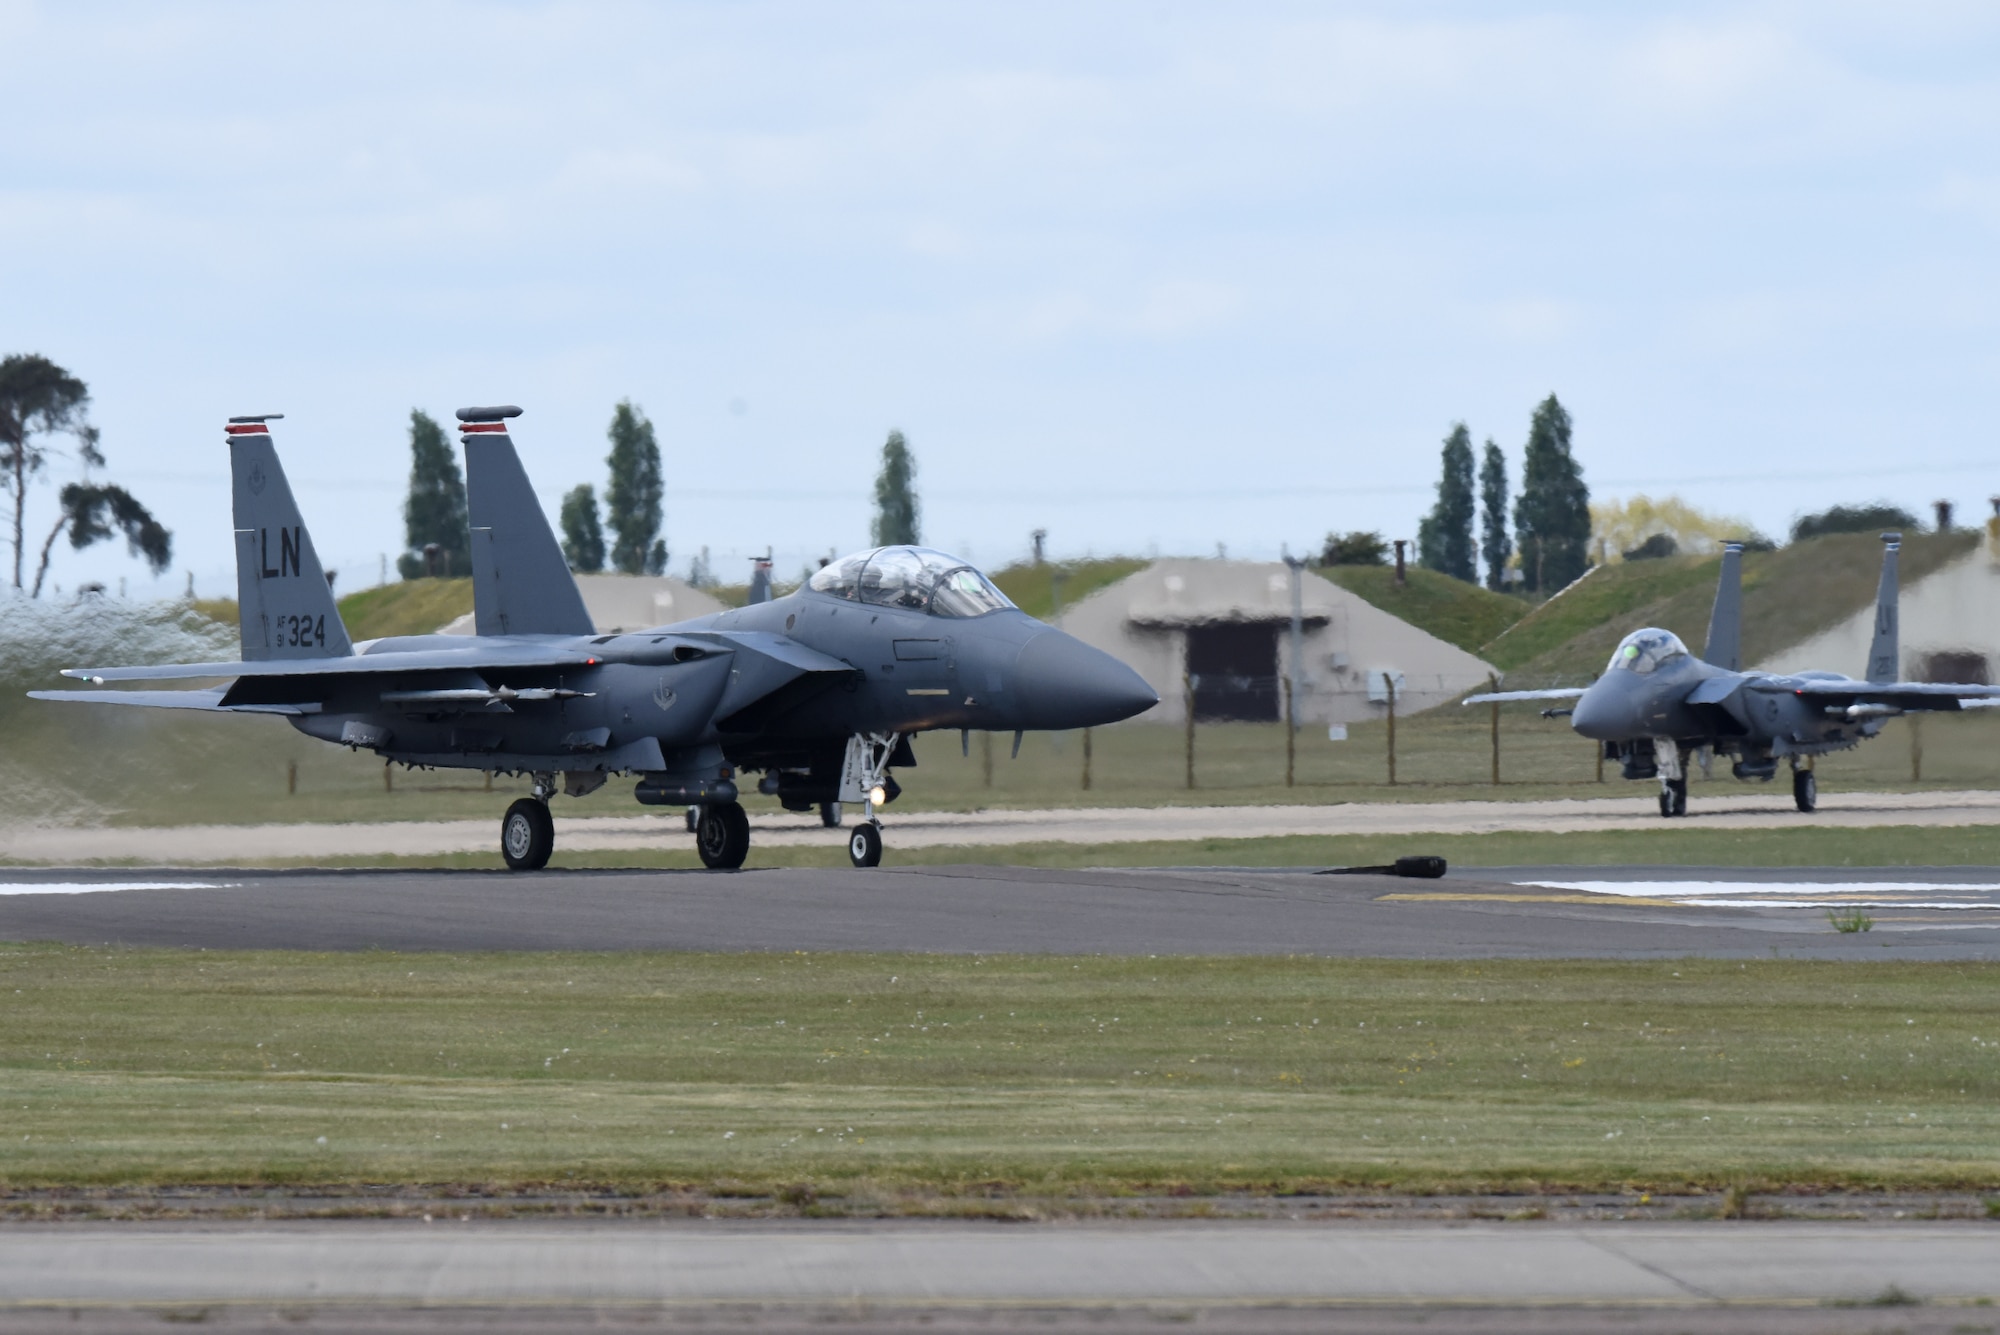 An F-15E Strike Eagle assigned to the 494th Fighter Squadron takes off at Royal Air Force Lakenheath, England, May 14, 2020.  An array of avionics and electronics systems gives the F-15E the capability to fight at low altitude, day or night and in all weather. (U.S. Air Force photo by Airman 1st Class Rhonda Smith)